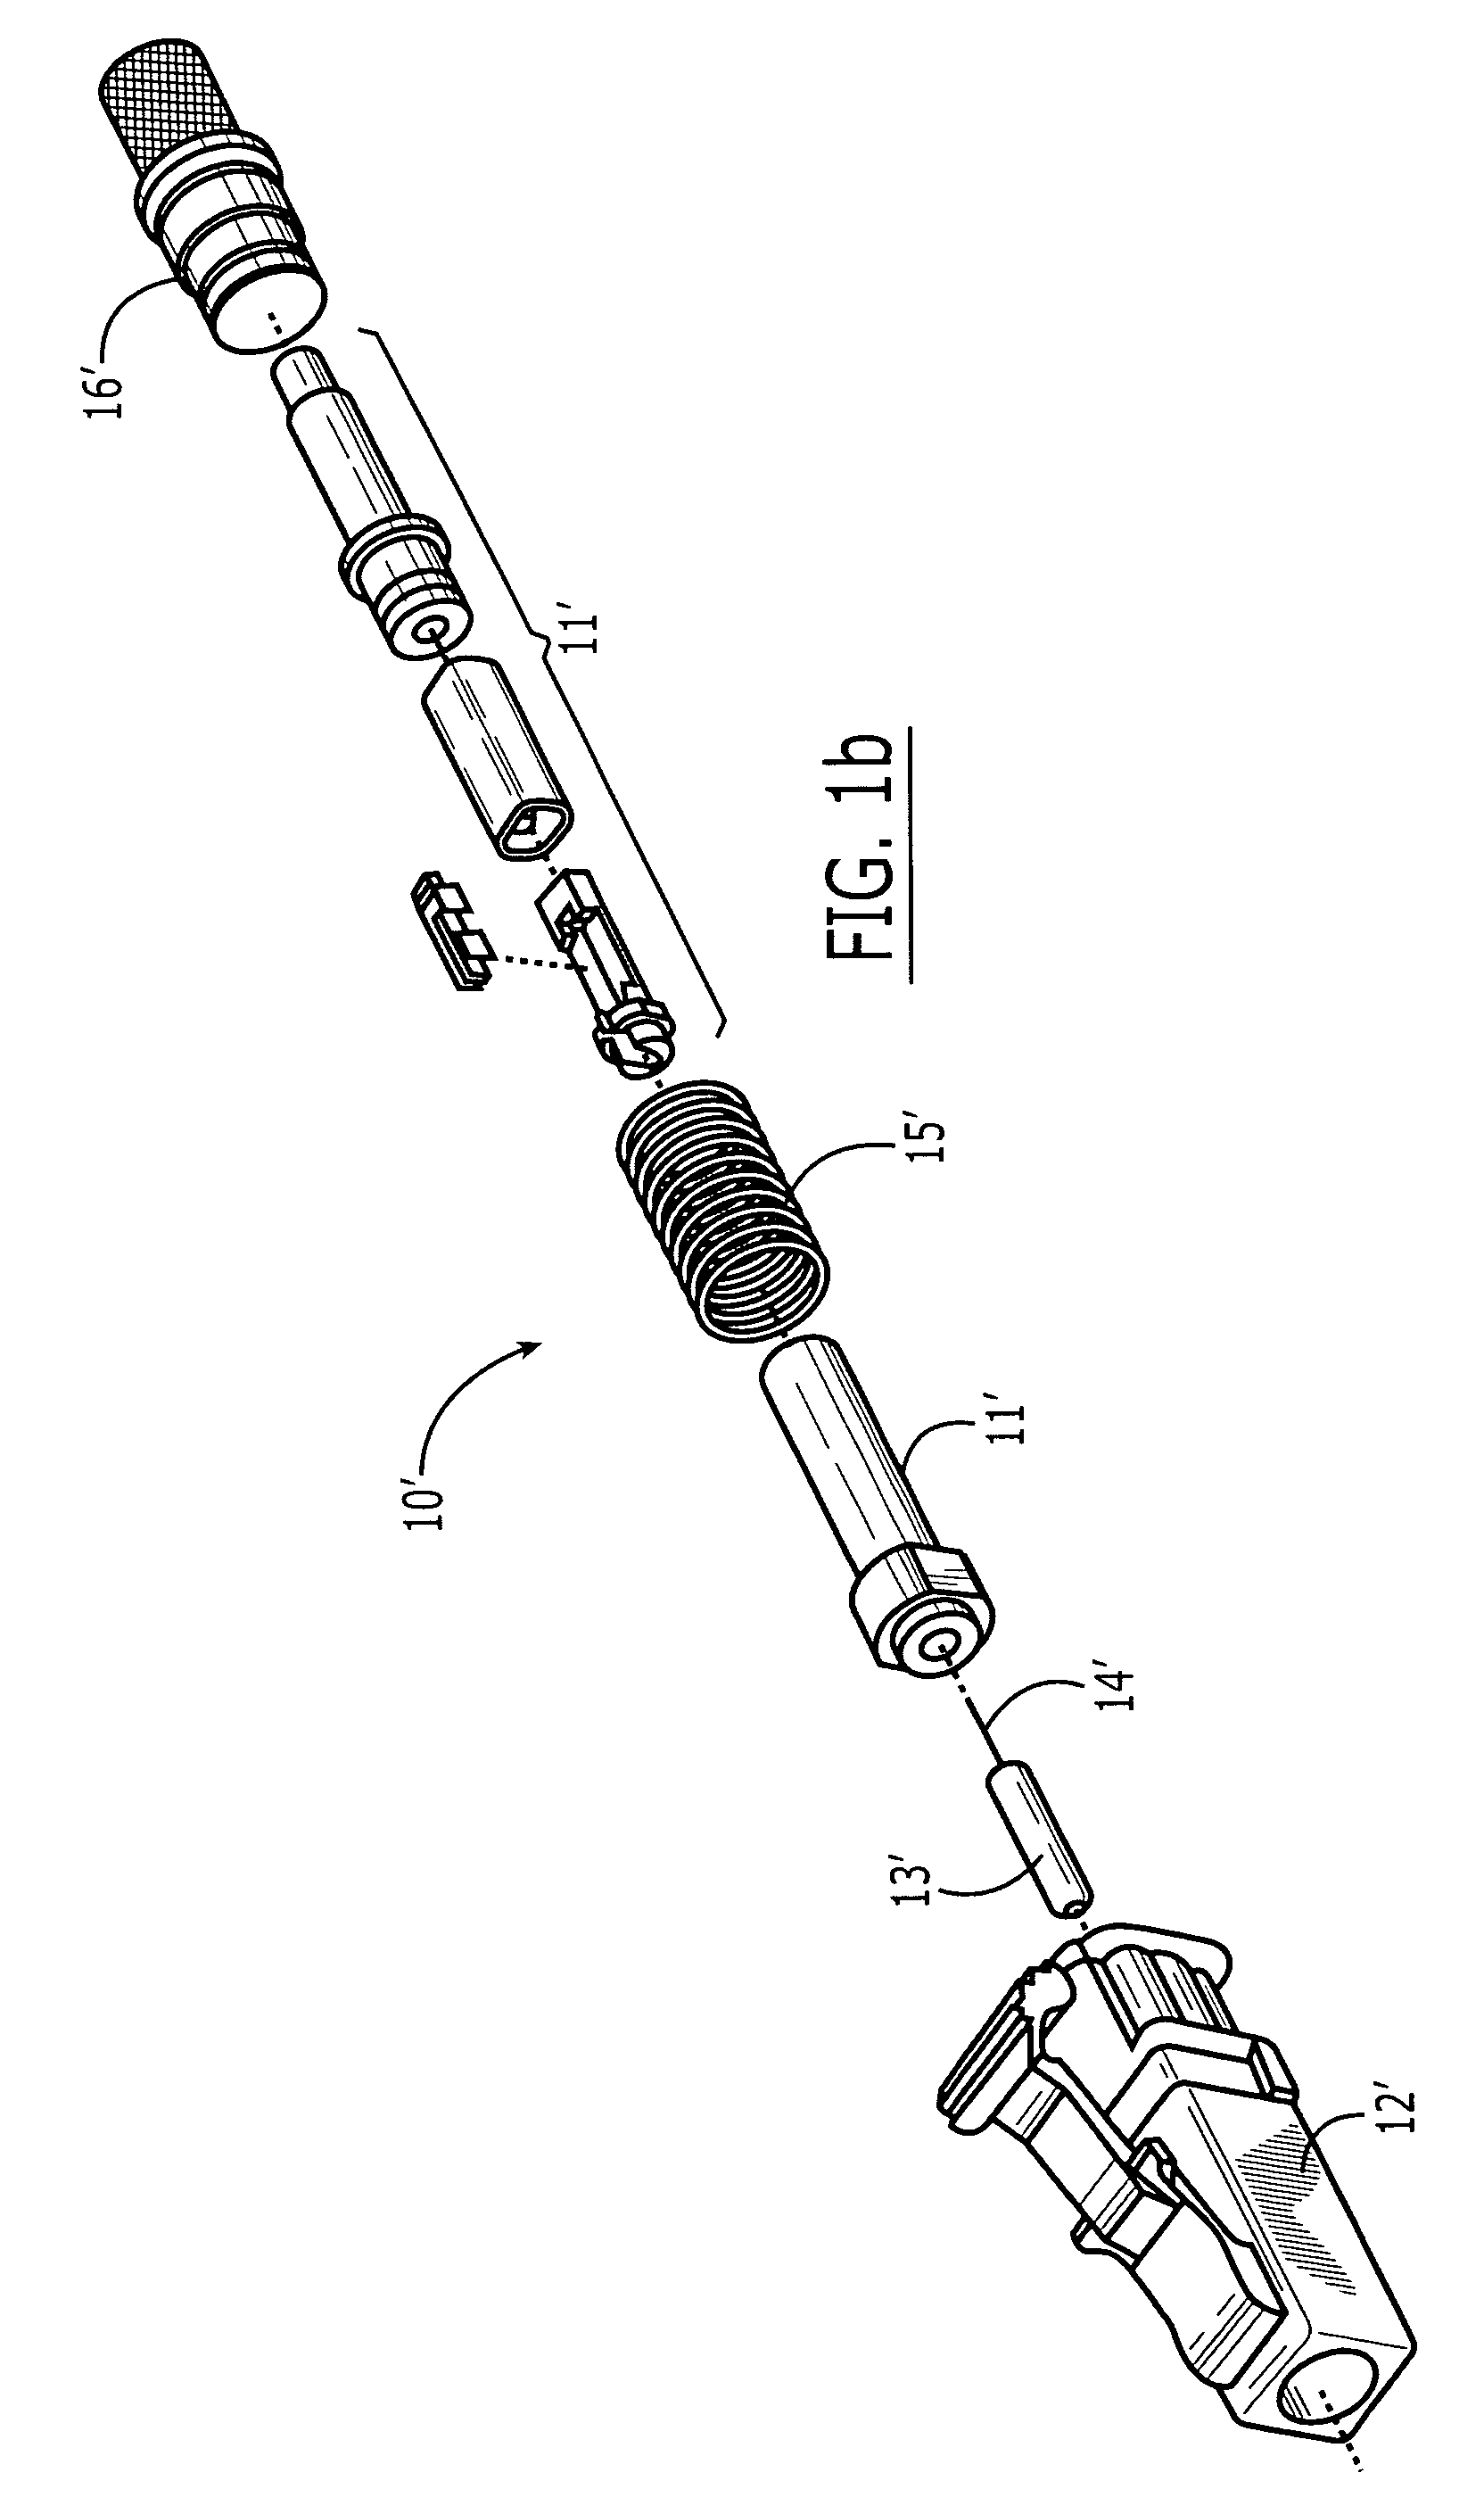 Optical fiber clamping assembly